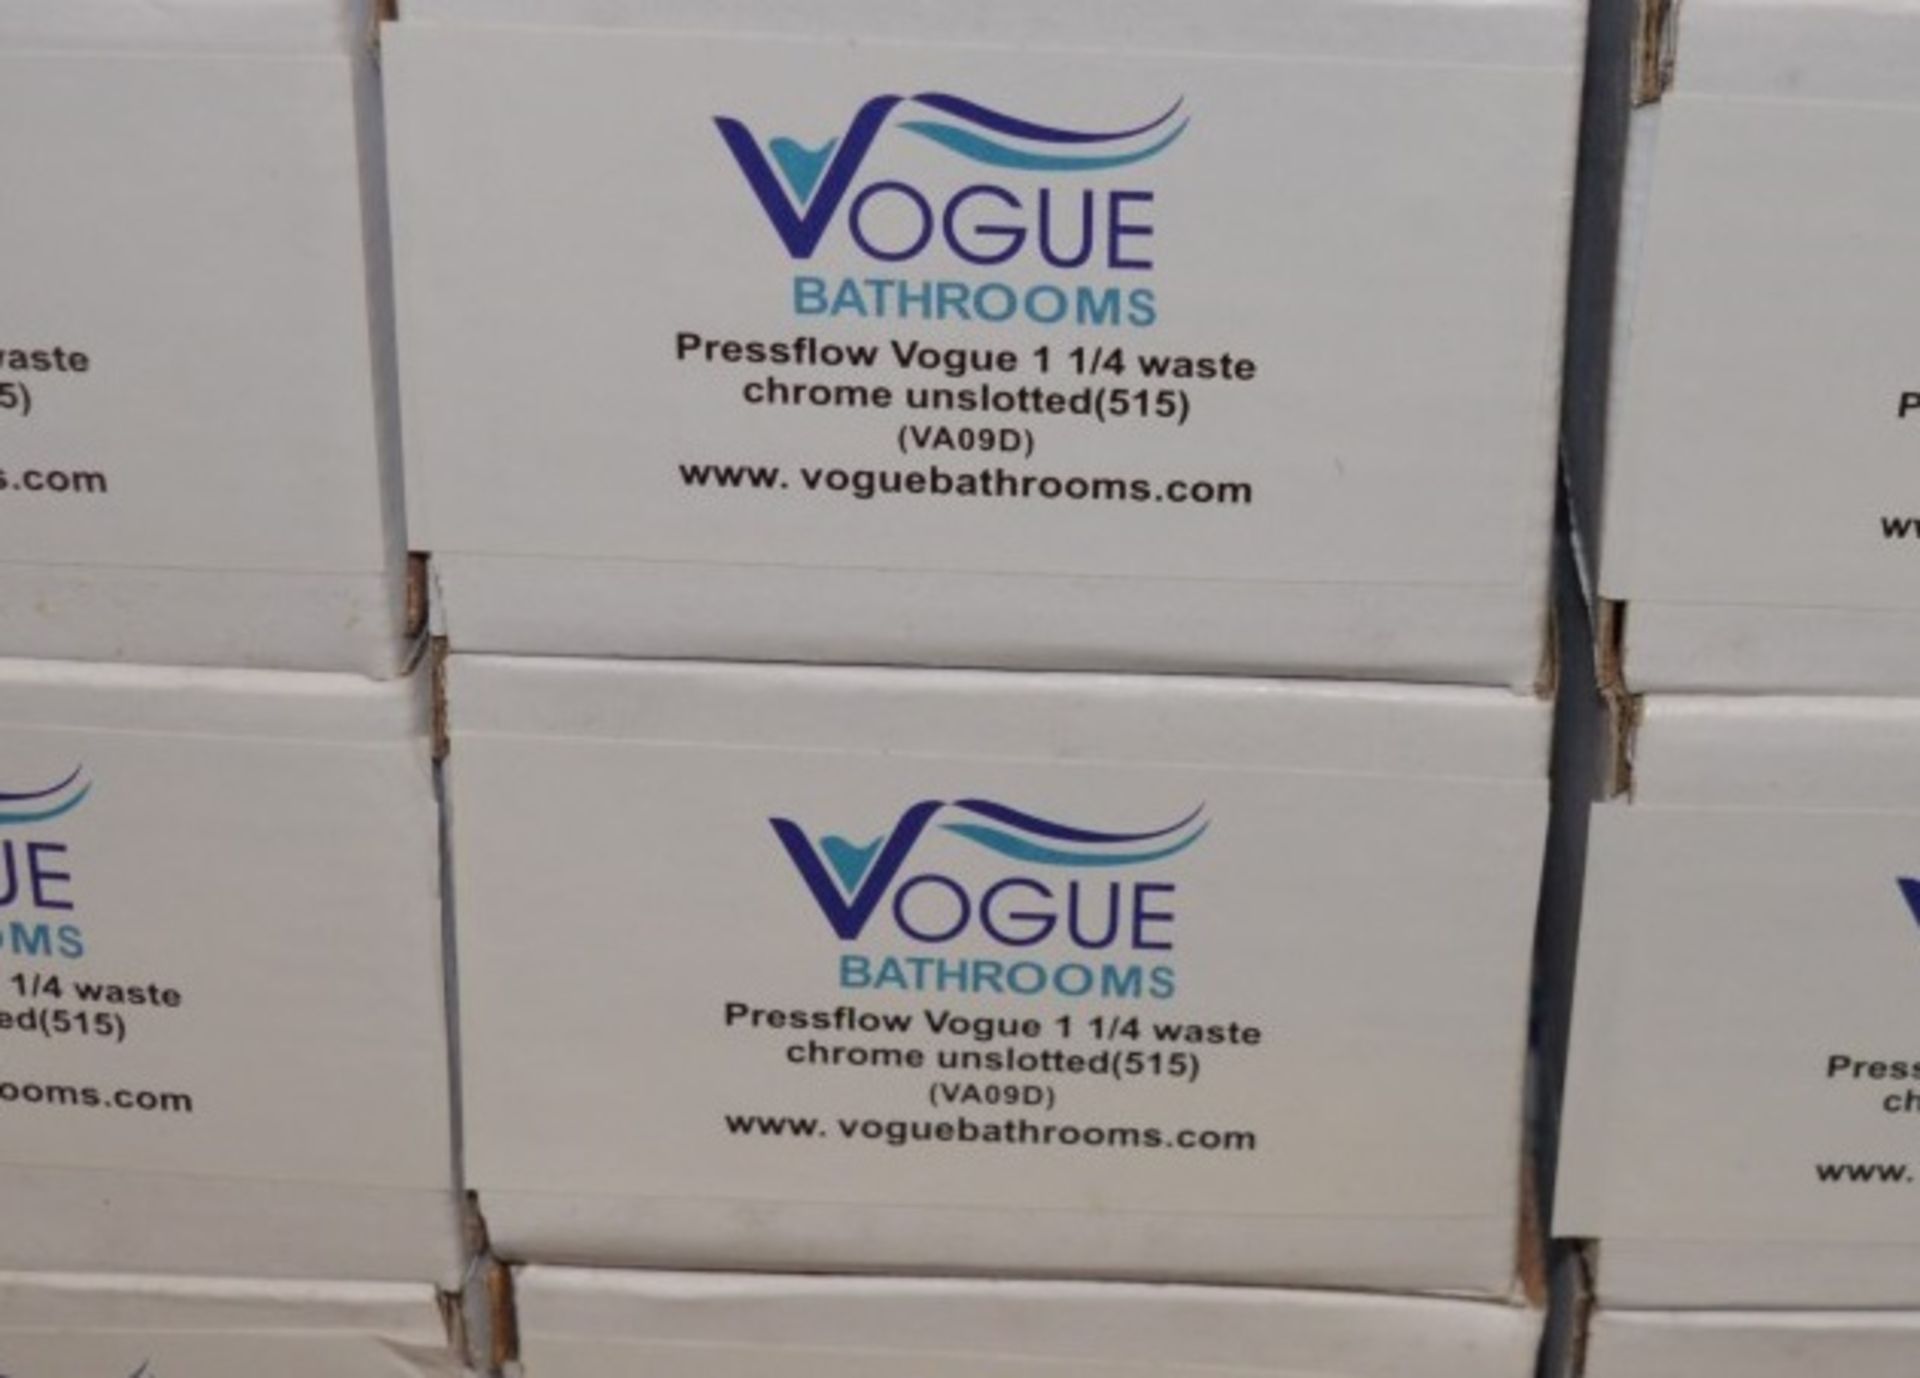 20 x Vogue Bathrooms Pressflow 1 1/4 Unslotted Waste Chrome Waste Fittings - VA09D - Brand New Stock - Image 4 of 5